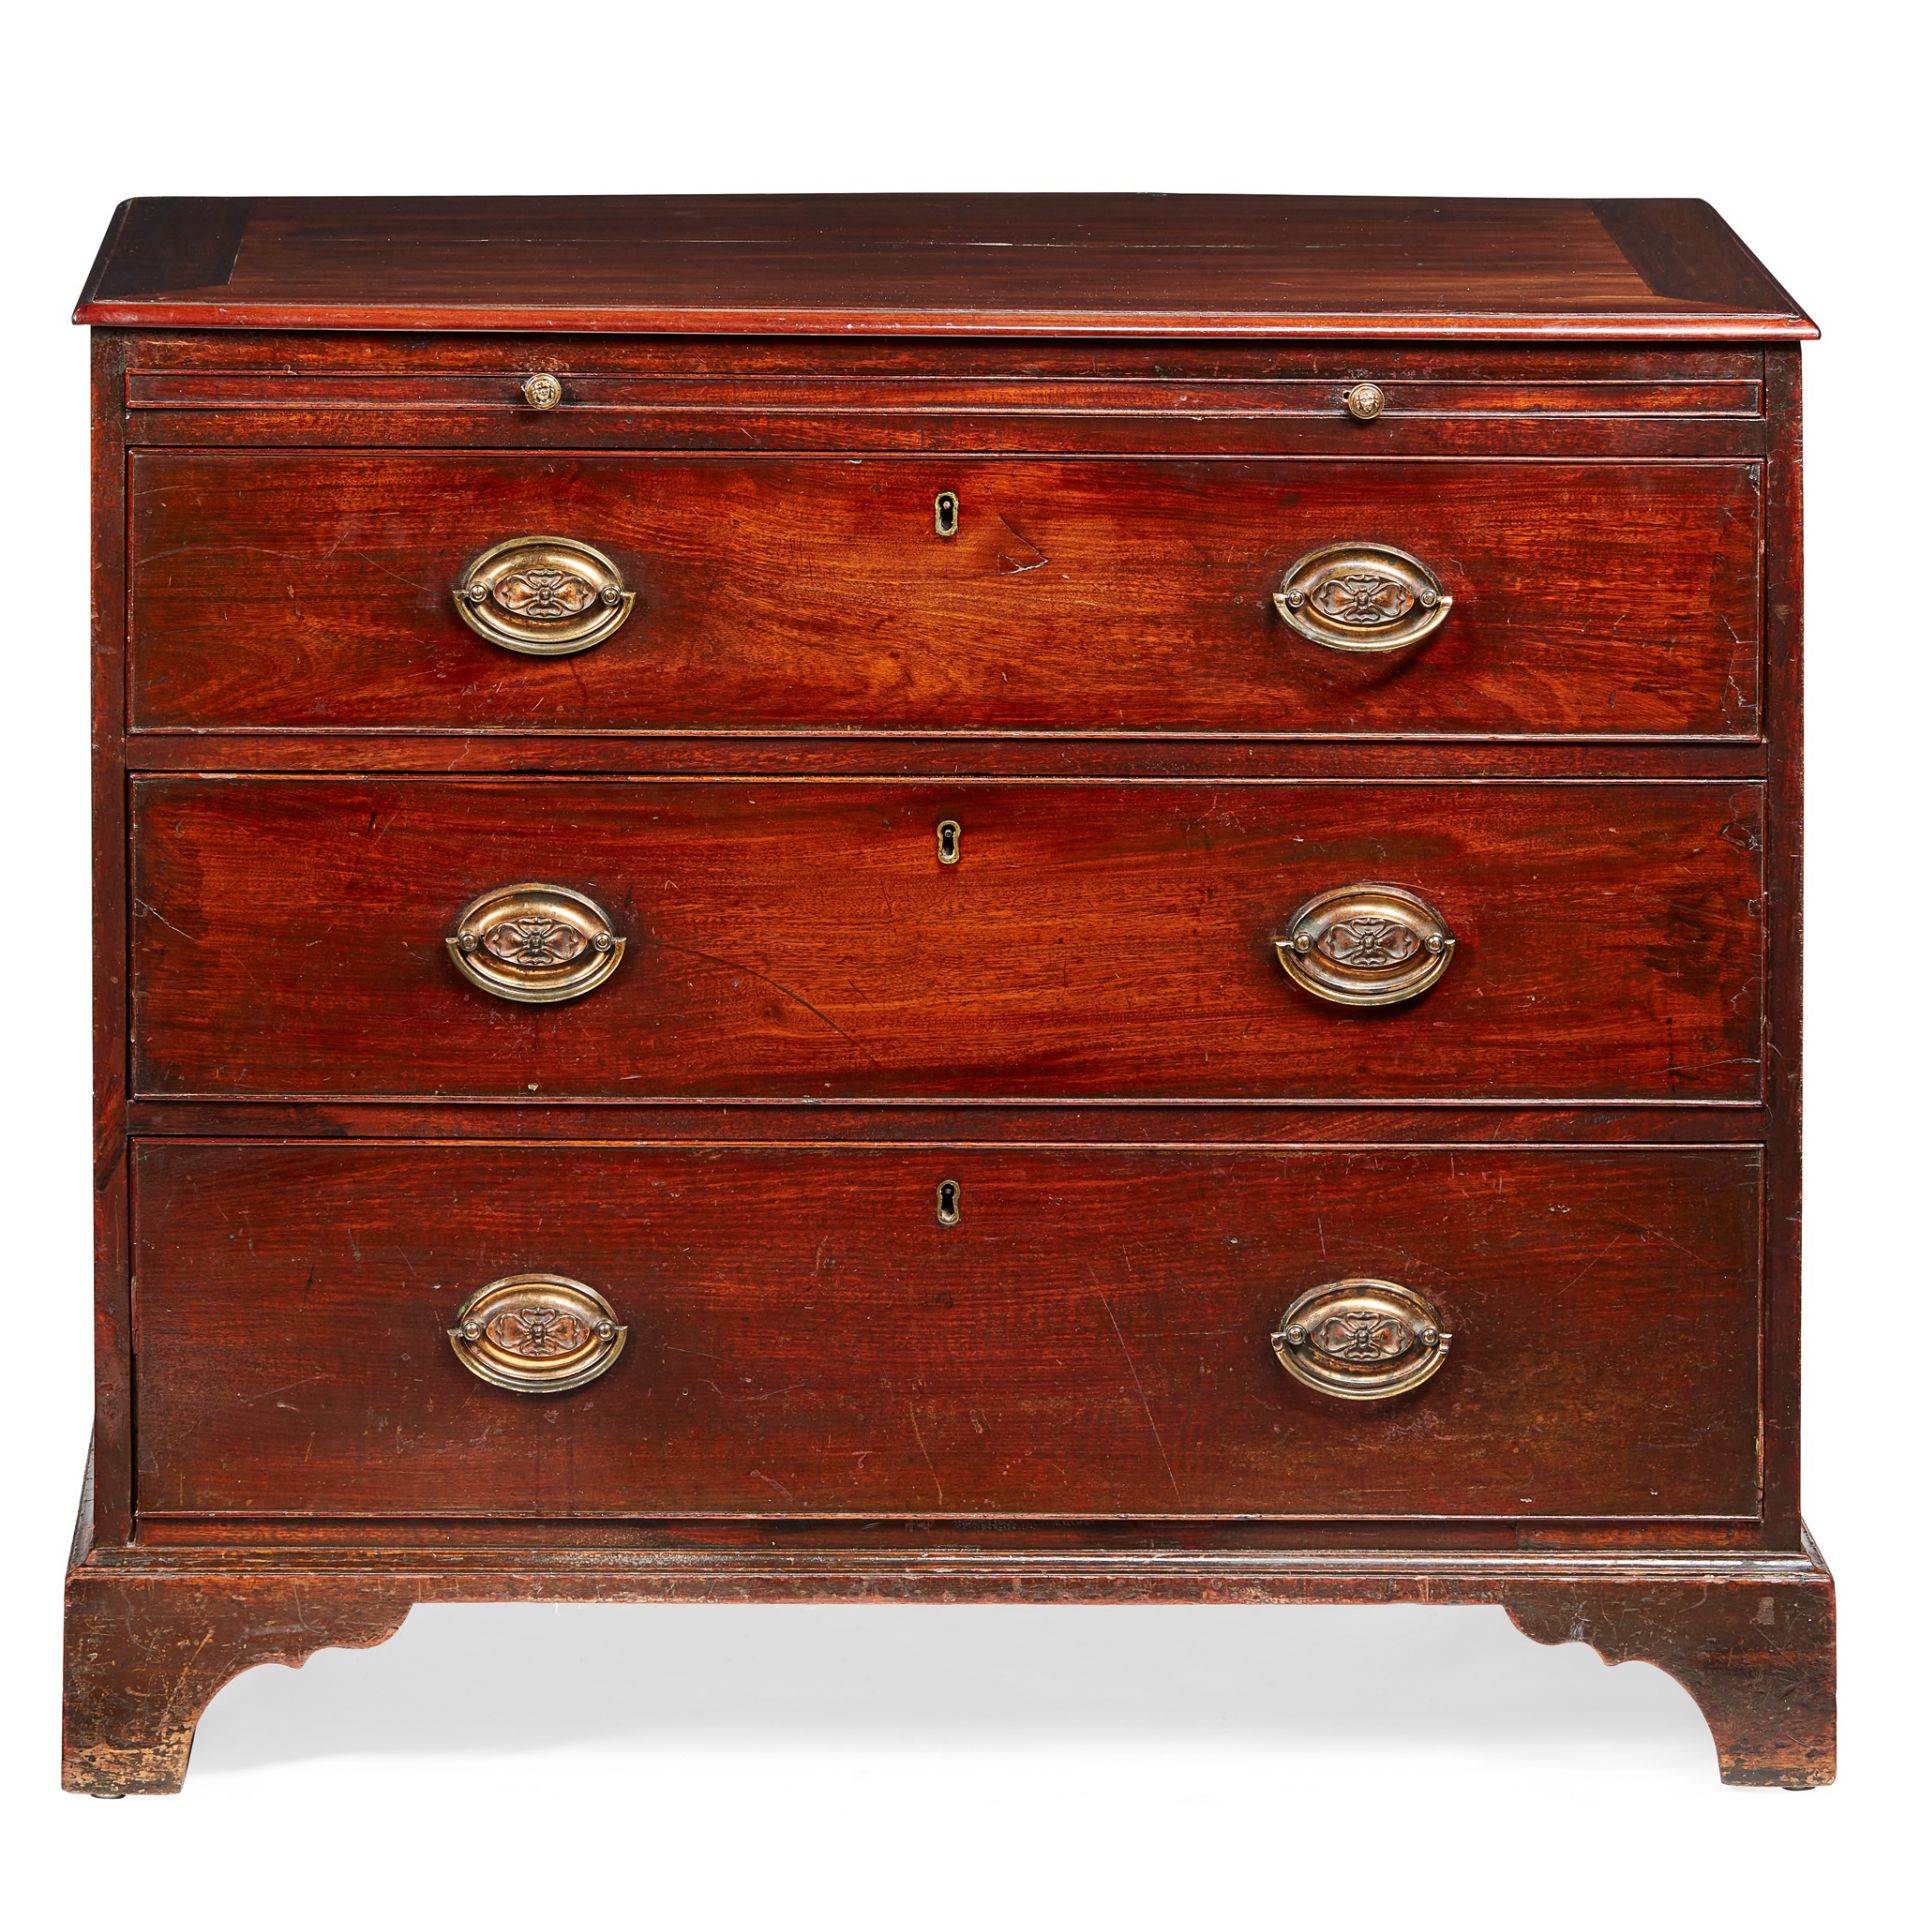 GEORGE III MAHOGANY BACHELOR'S CHEST OF DRAWERS 18TH CENTURY - Image 2 of 3